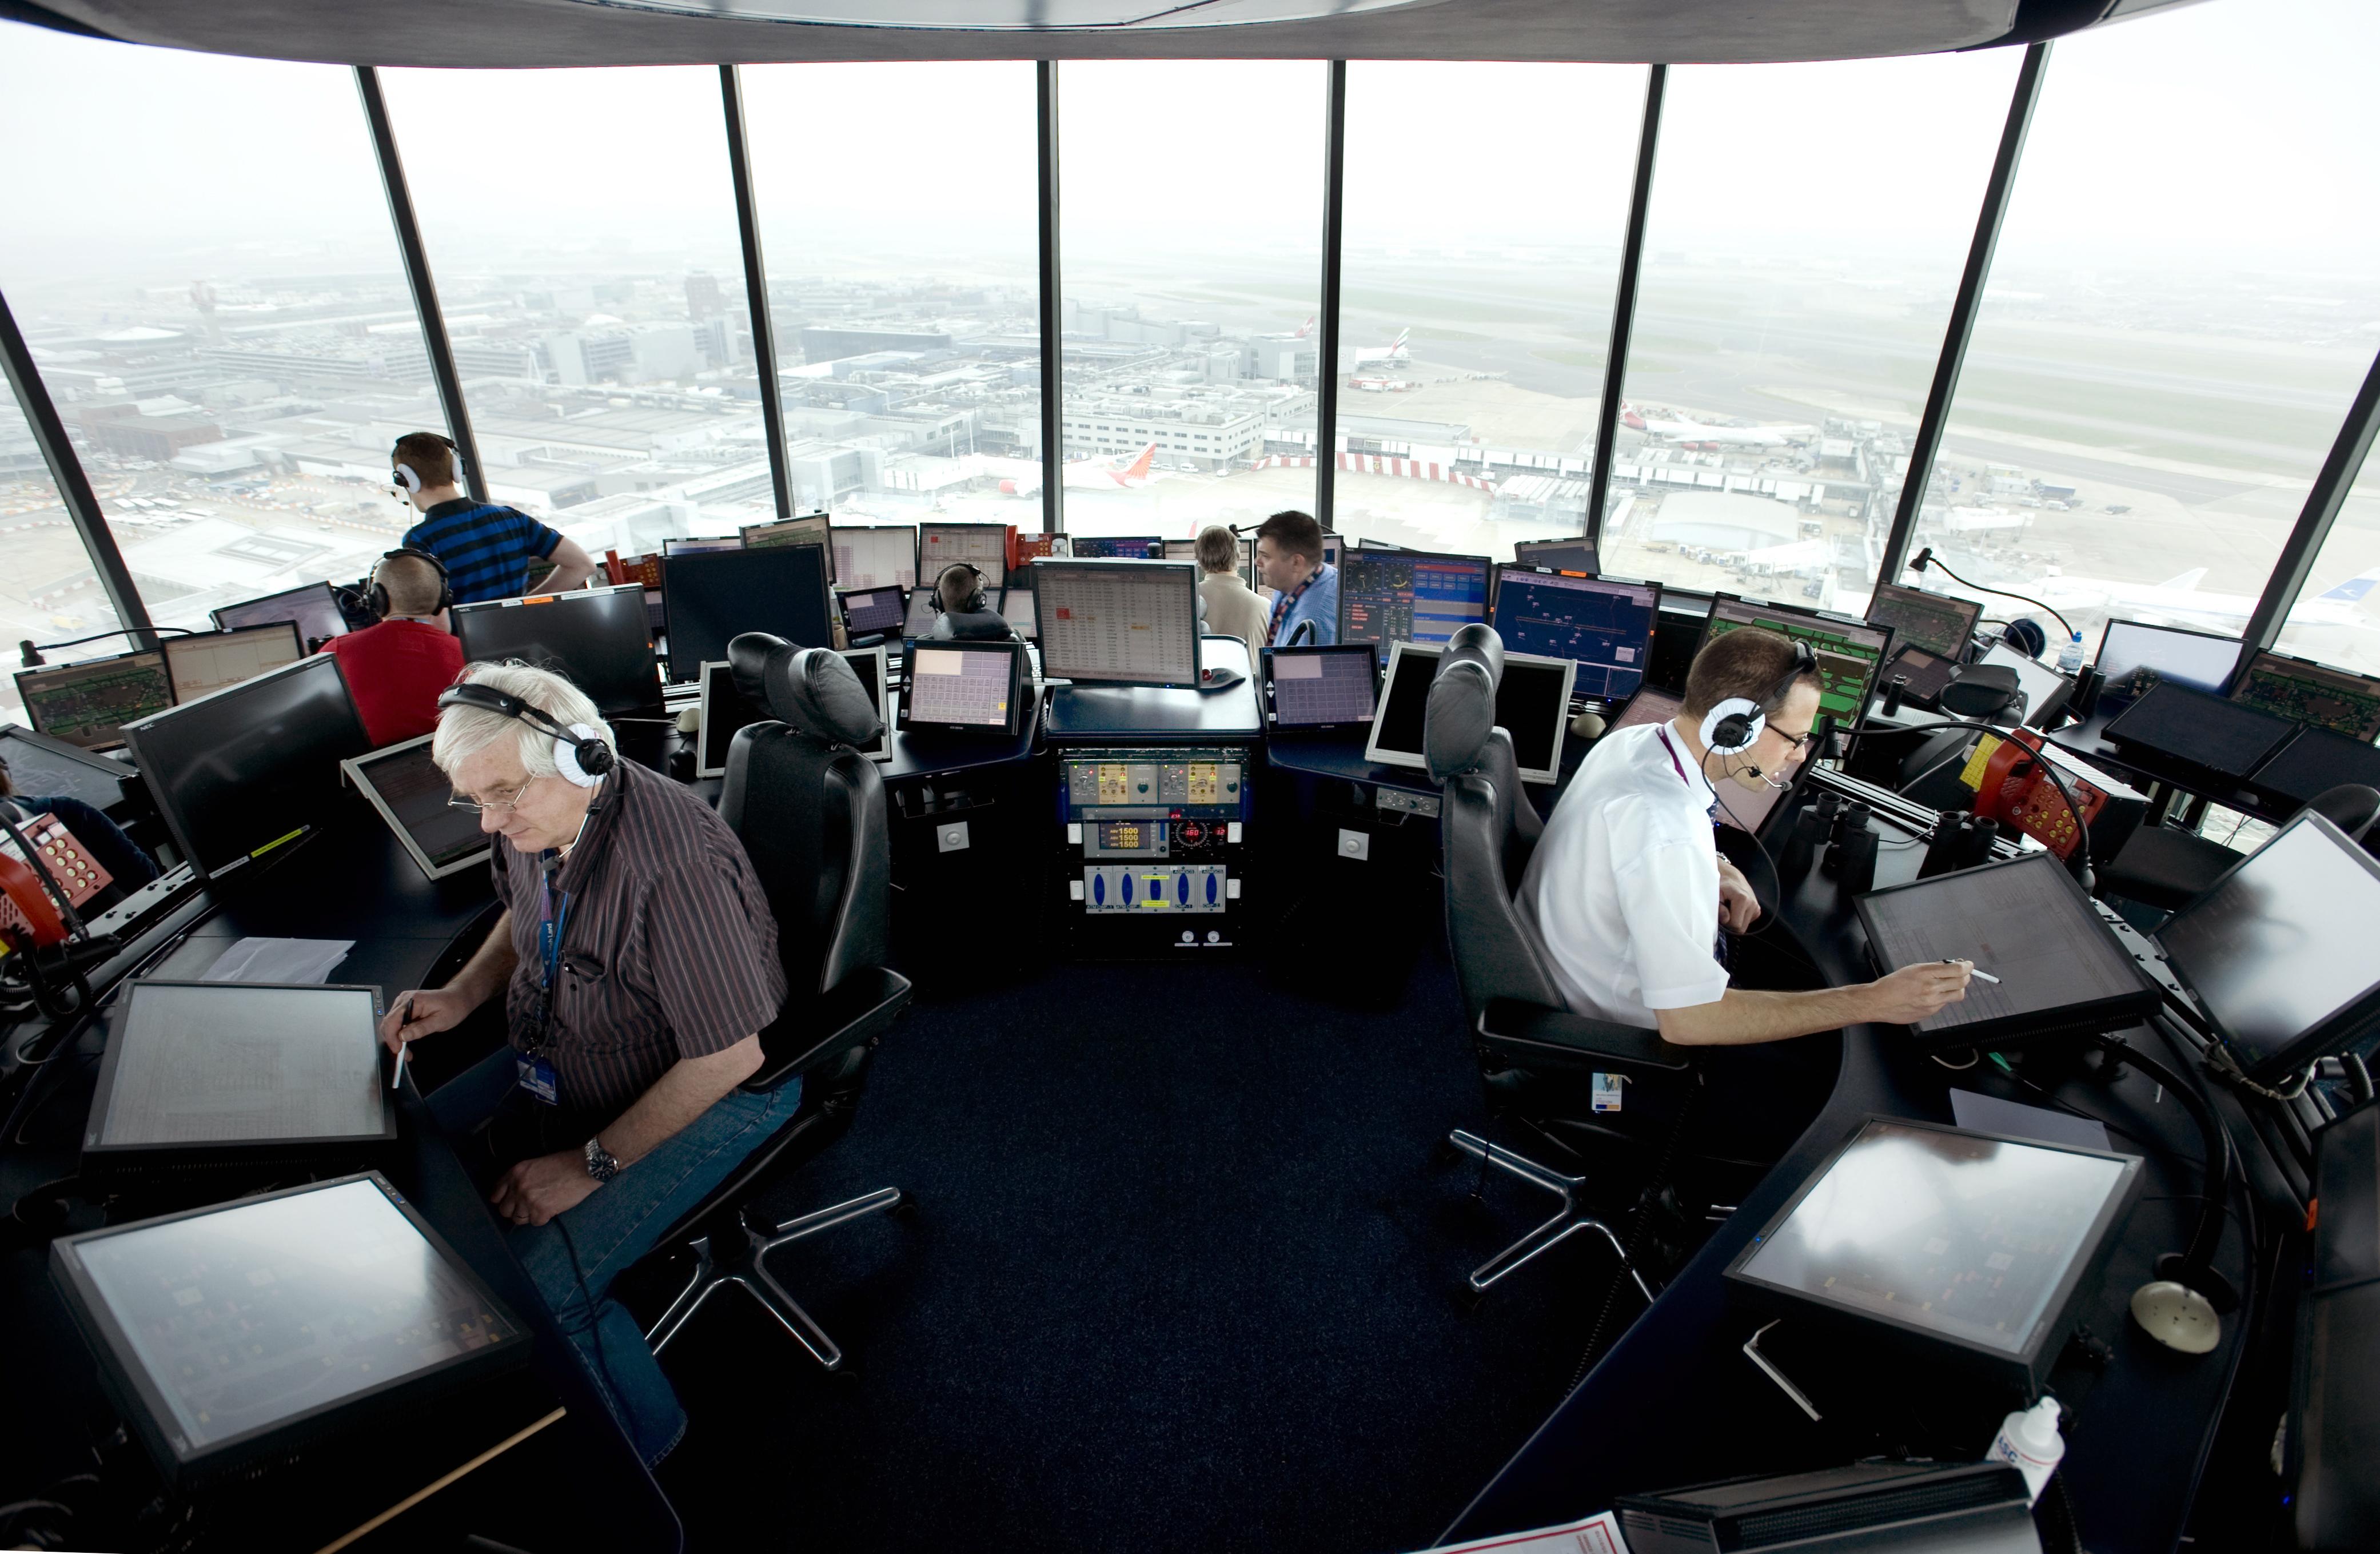 air traffic and navigation services company